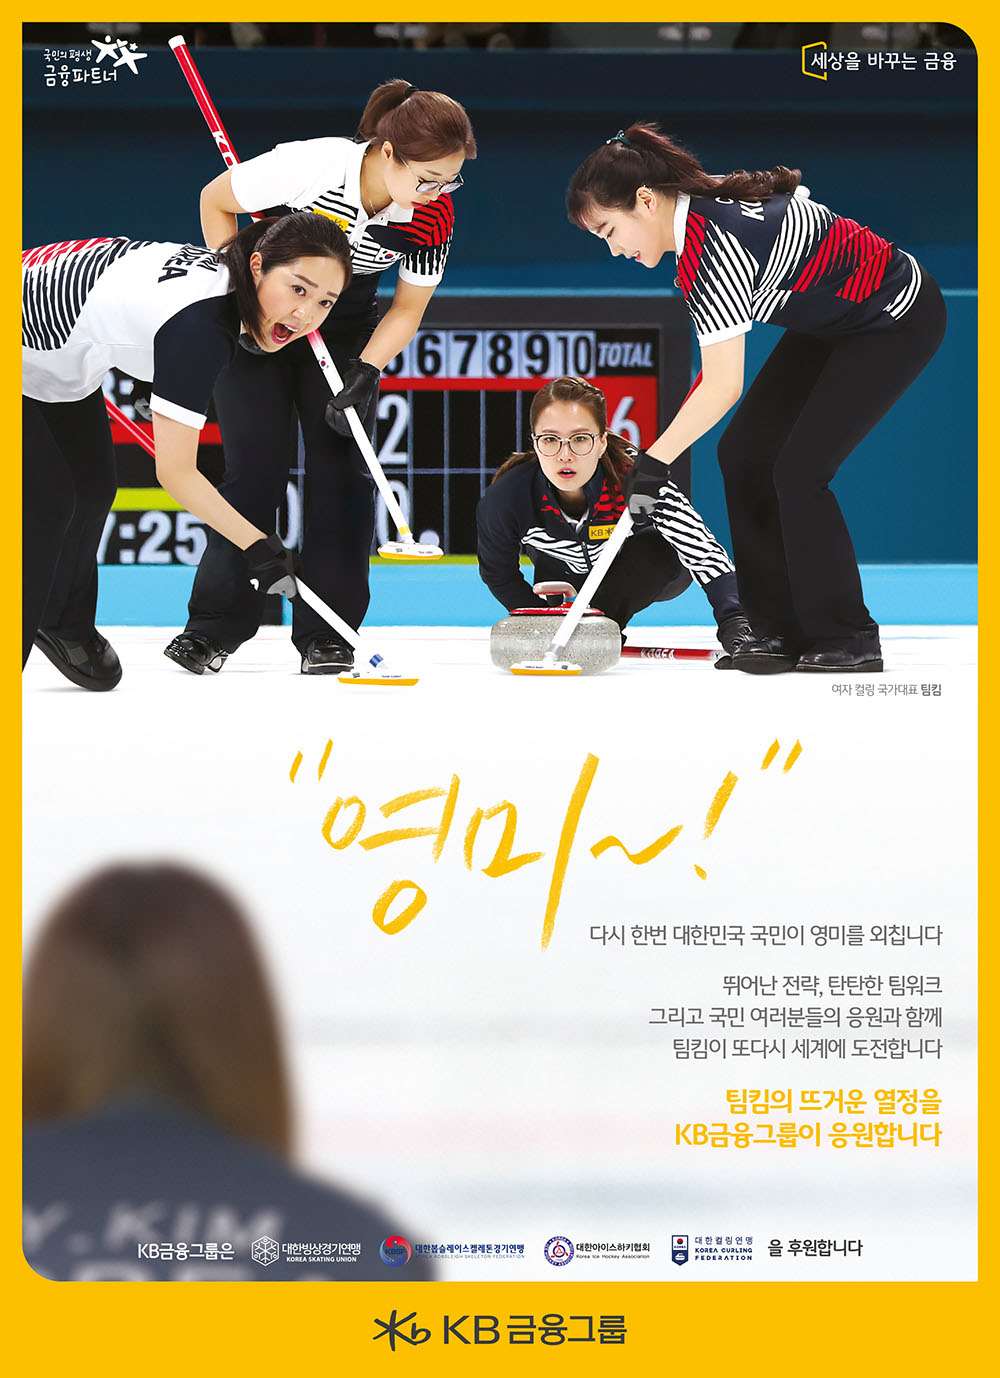 Rooting for KB's winter sports athletes - curling